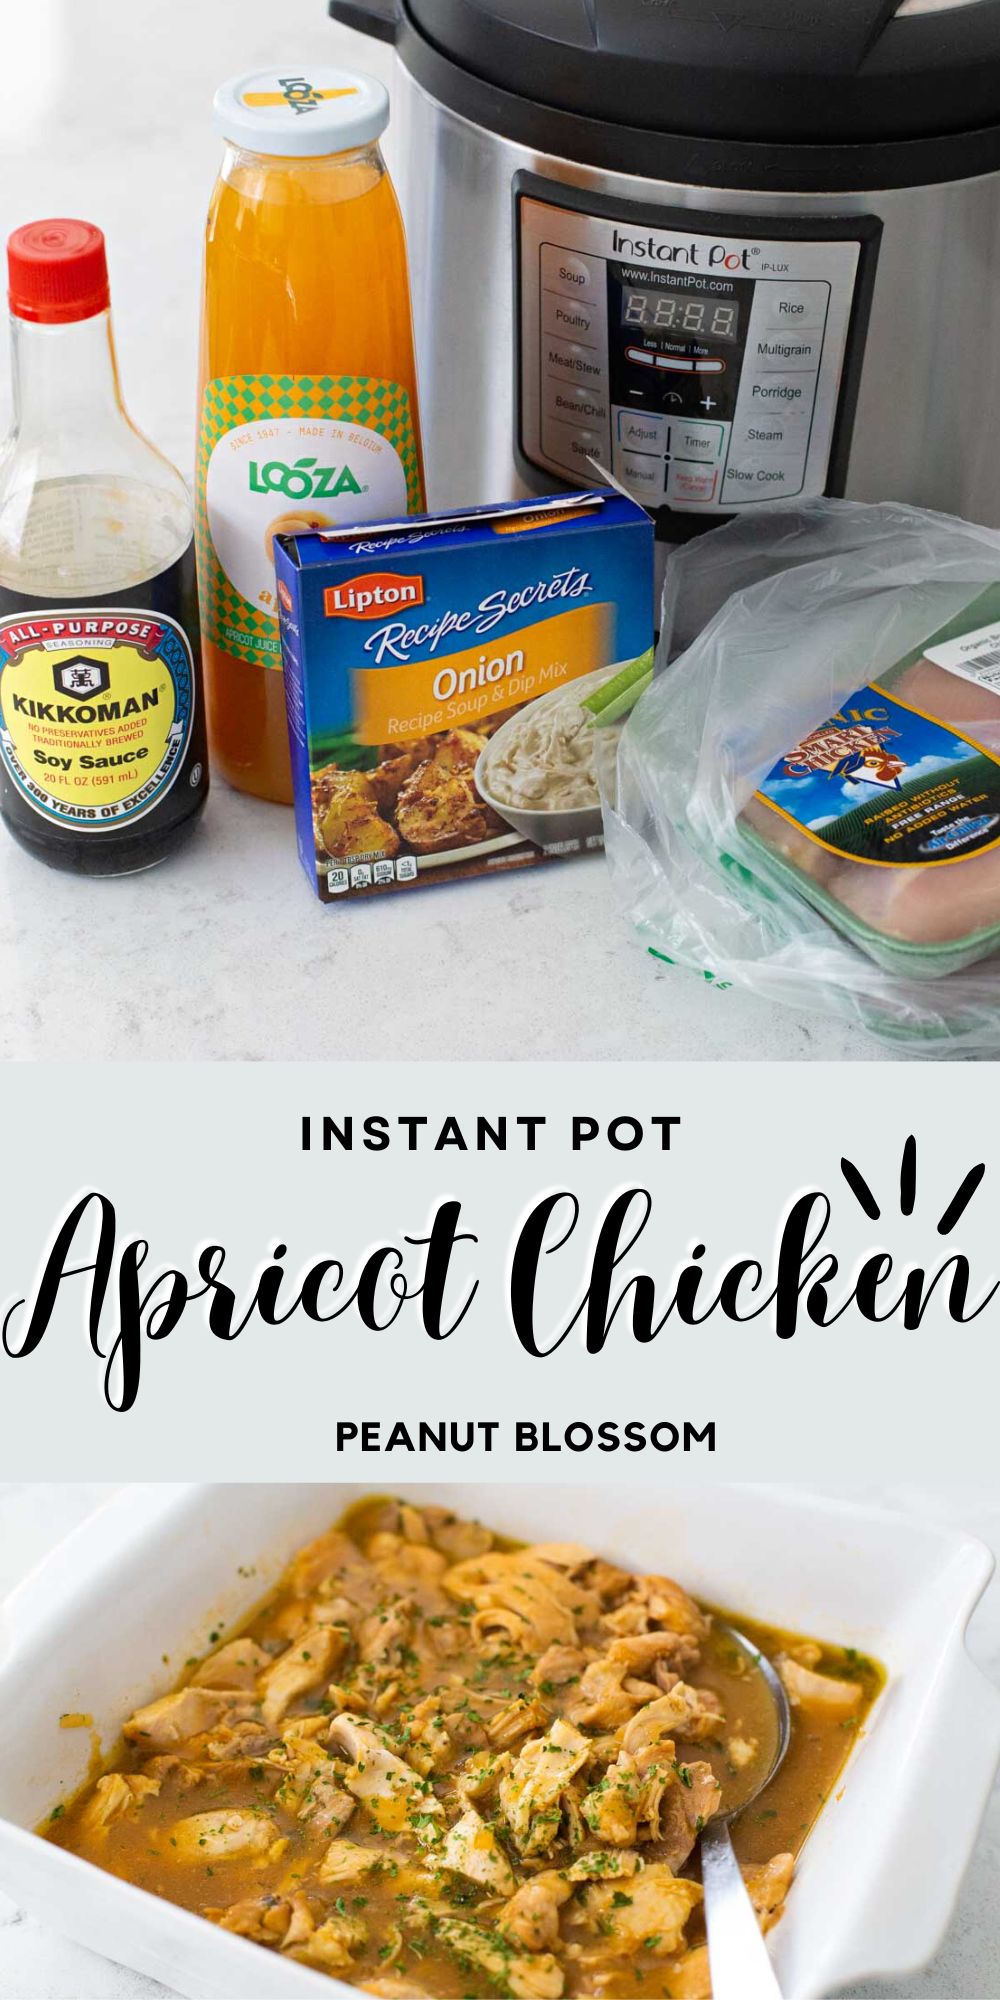 The photo collage shows the ingredients next to the Instant Pot next to a photo of the cooked apricot chicken in a serving dish.